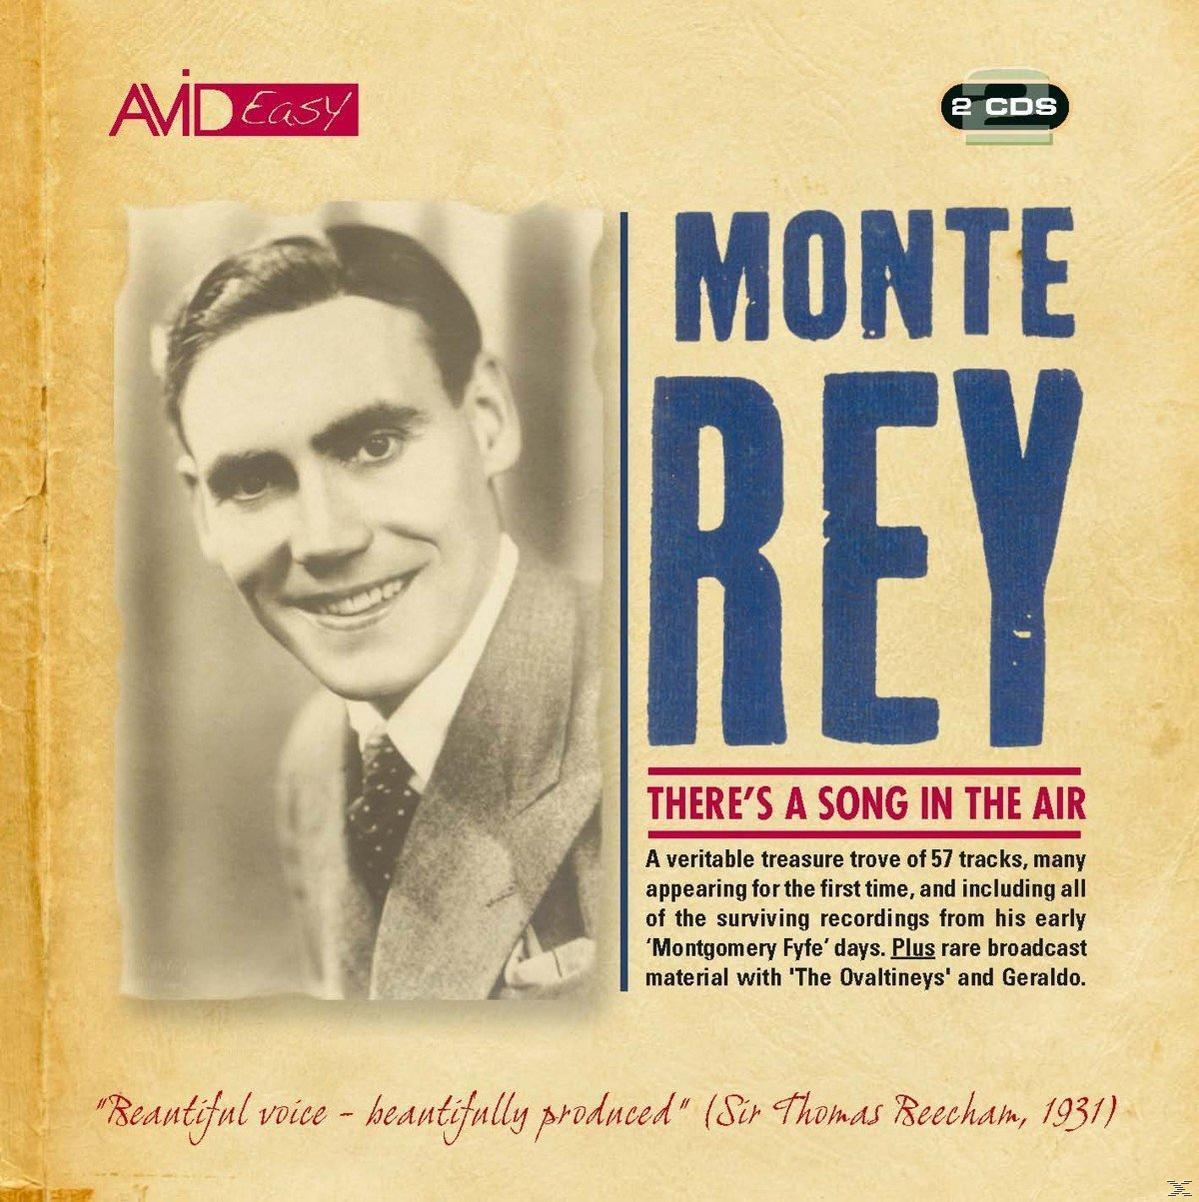 In Monte The Ray (CD) Rey-Theres Air - Song - A